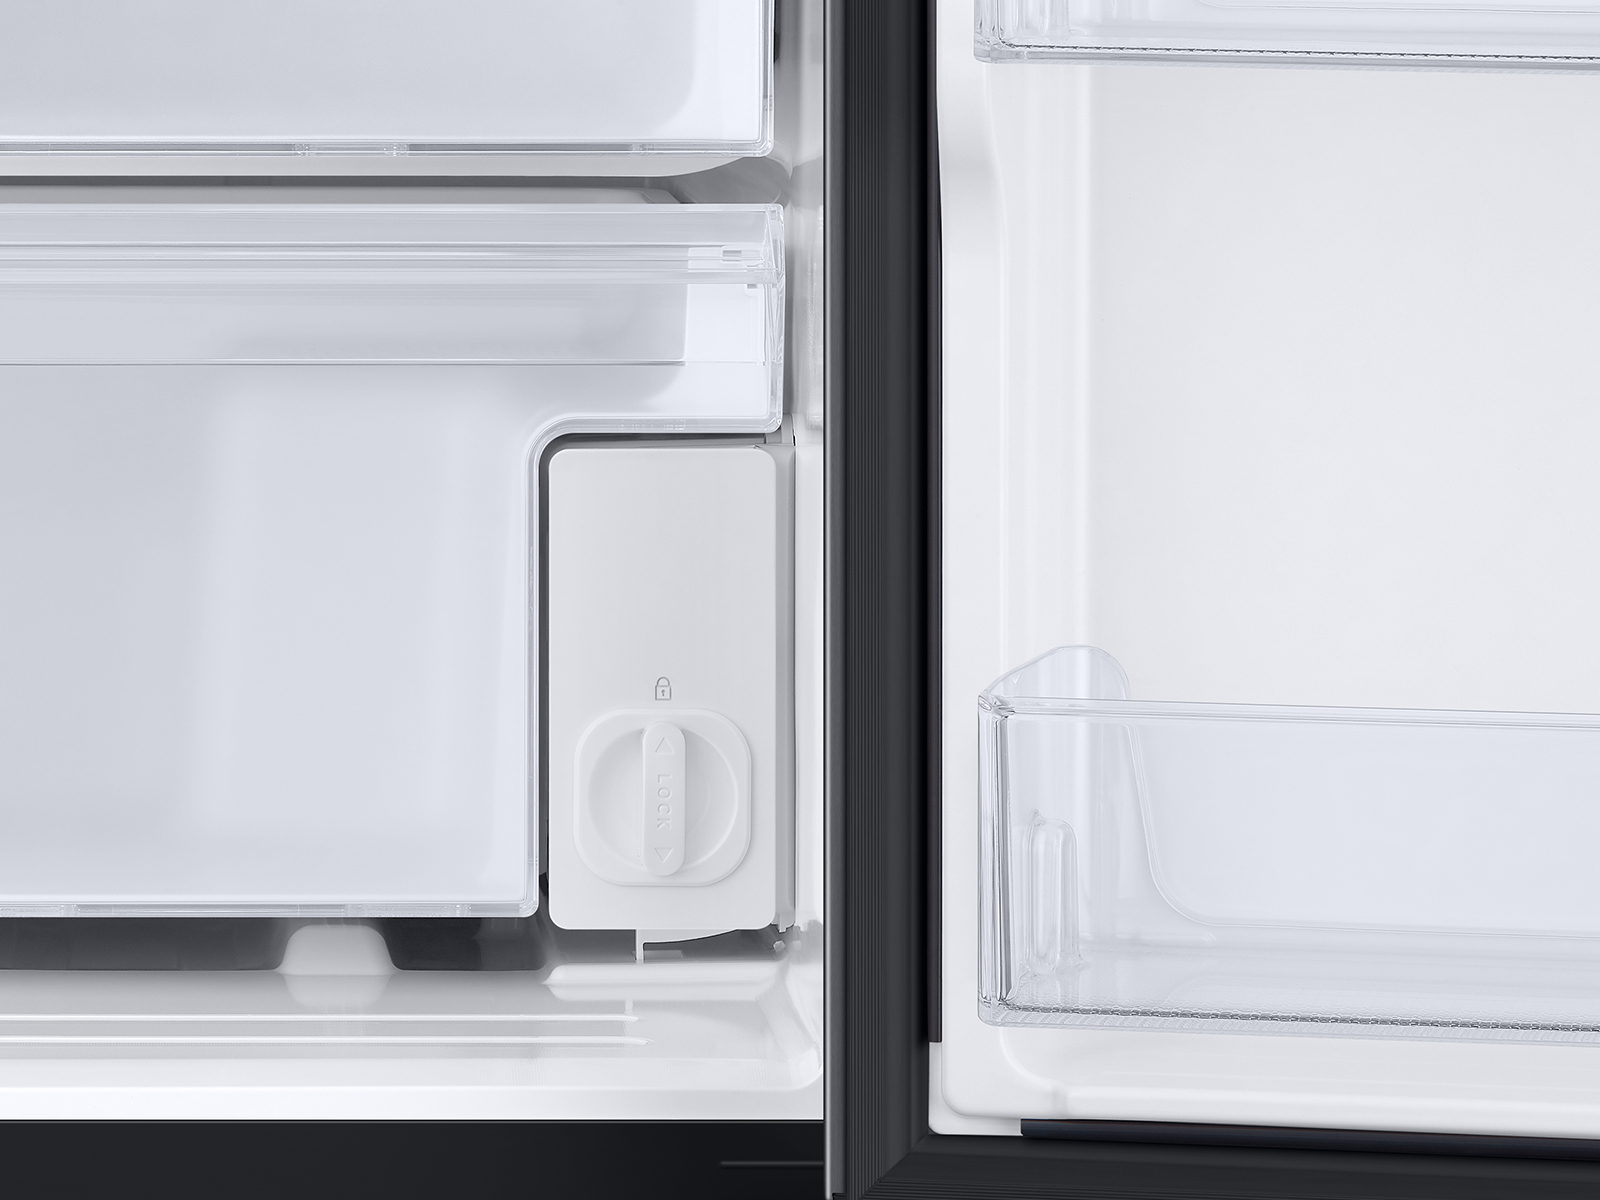 Haier mini fridge with seperate freezer - appliances - by owner